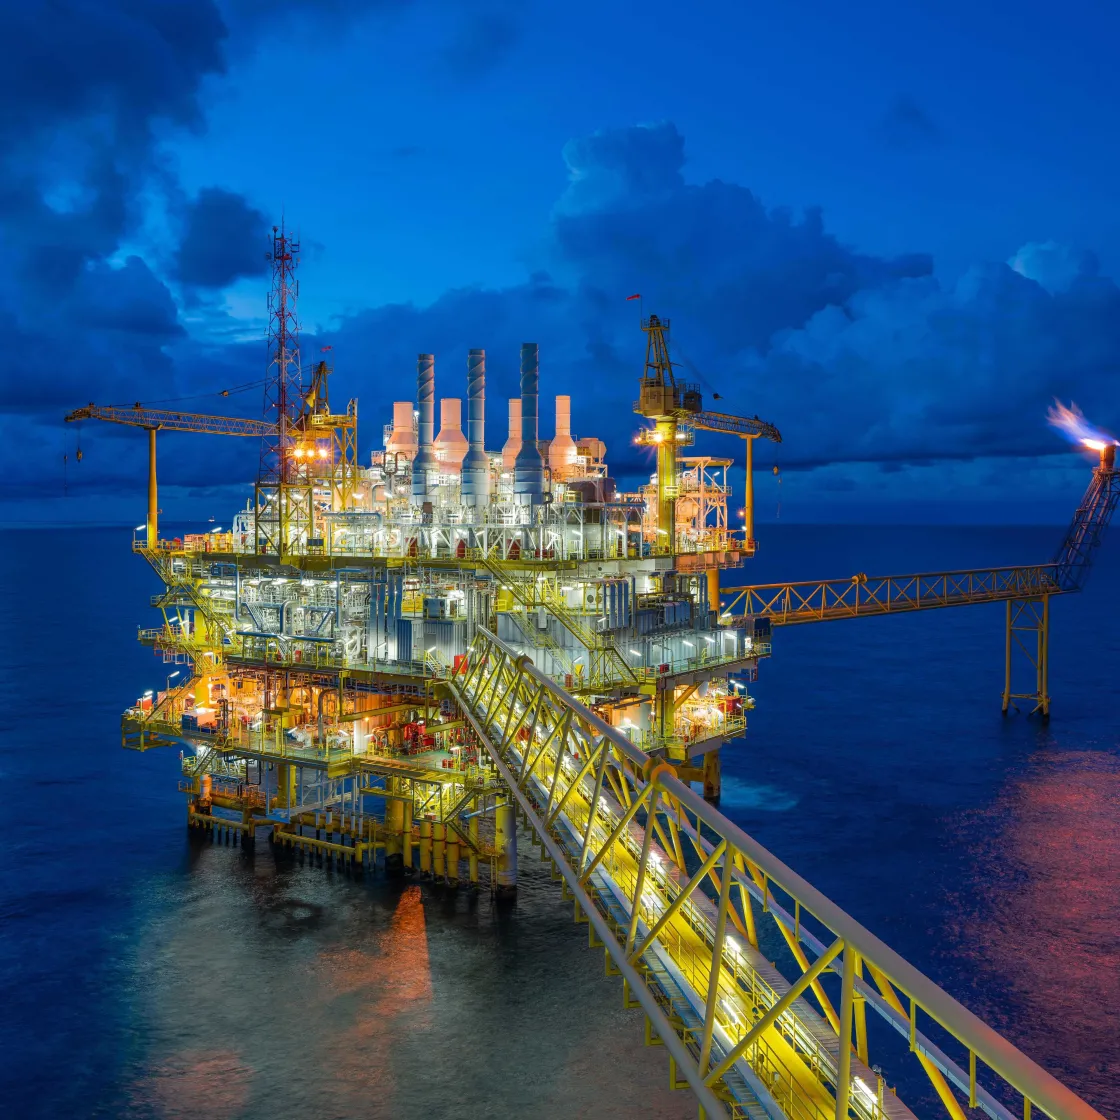 Offshore oil and gas central processing platform